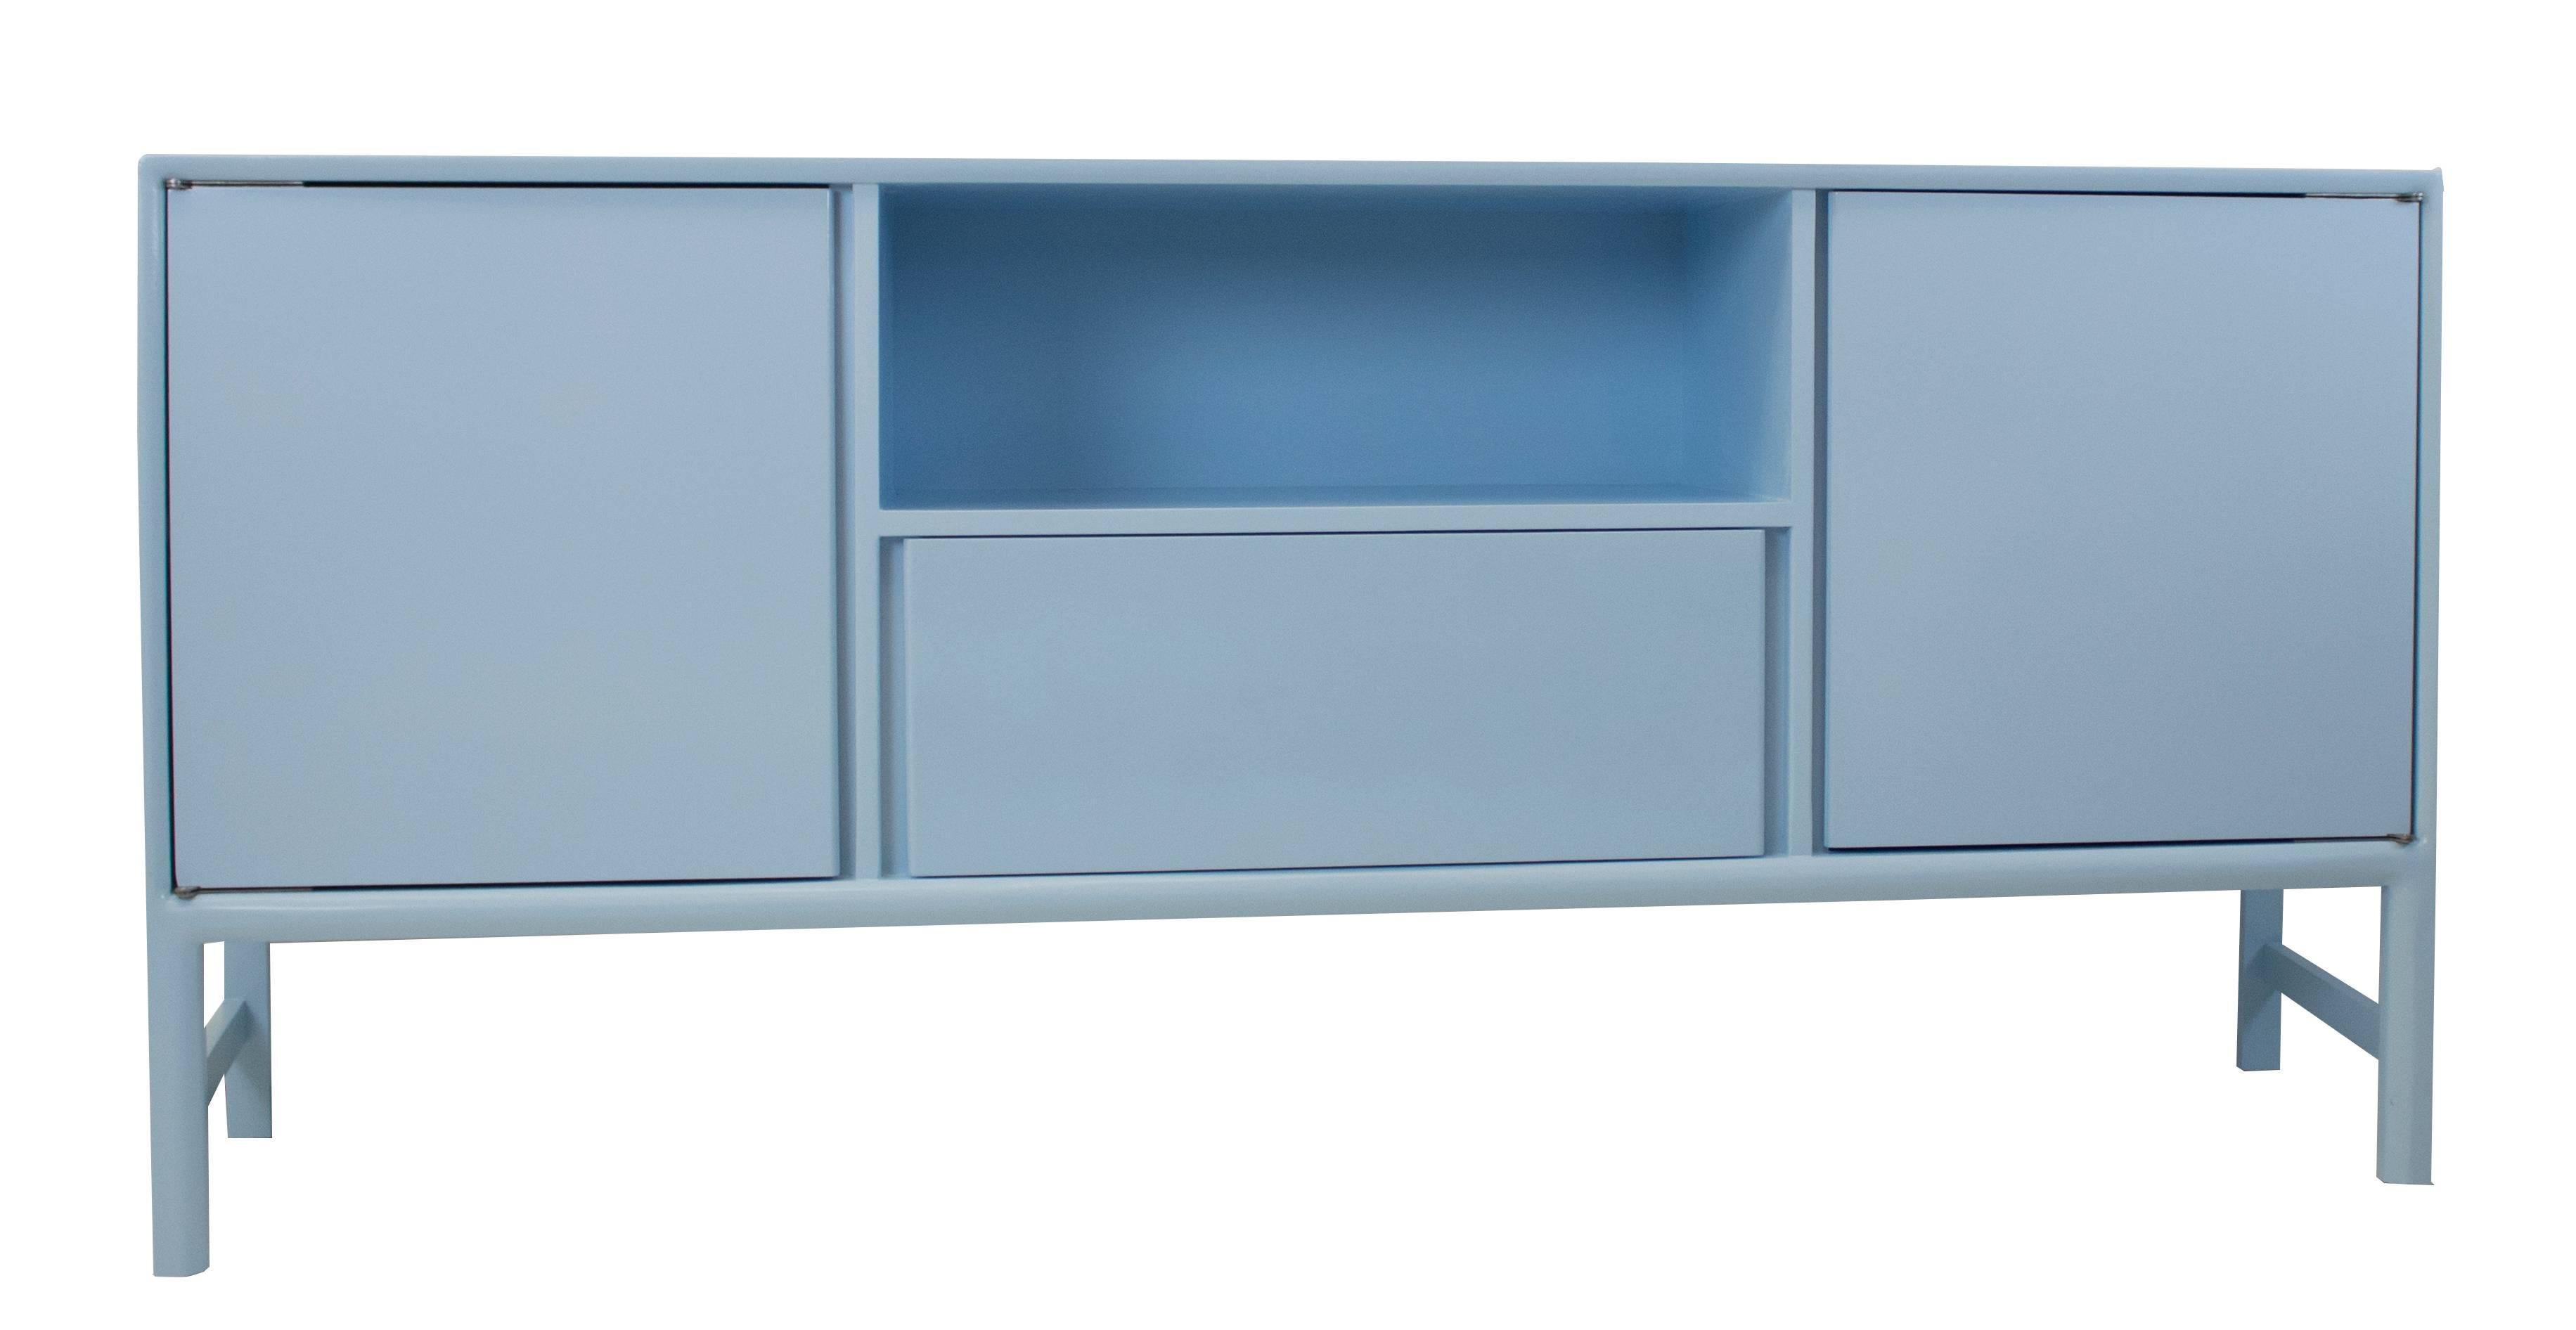 Lacquered in high gloss powder blue, this modern sideboard features cabinets, a drawer and a cubby / shelf. The sides of the piece angle inward. The overall footprint is shaped like a boomerang, with a subtle point on the back edge.

Overall: 76”W x